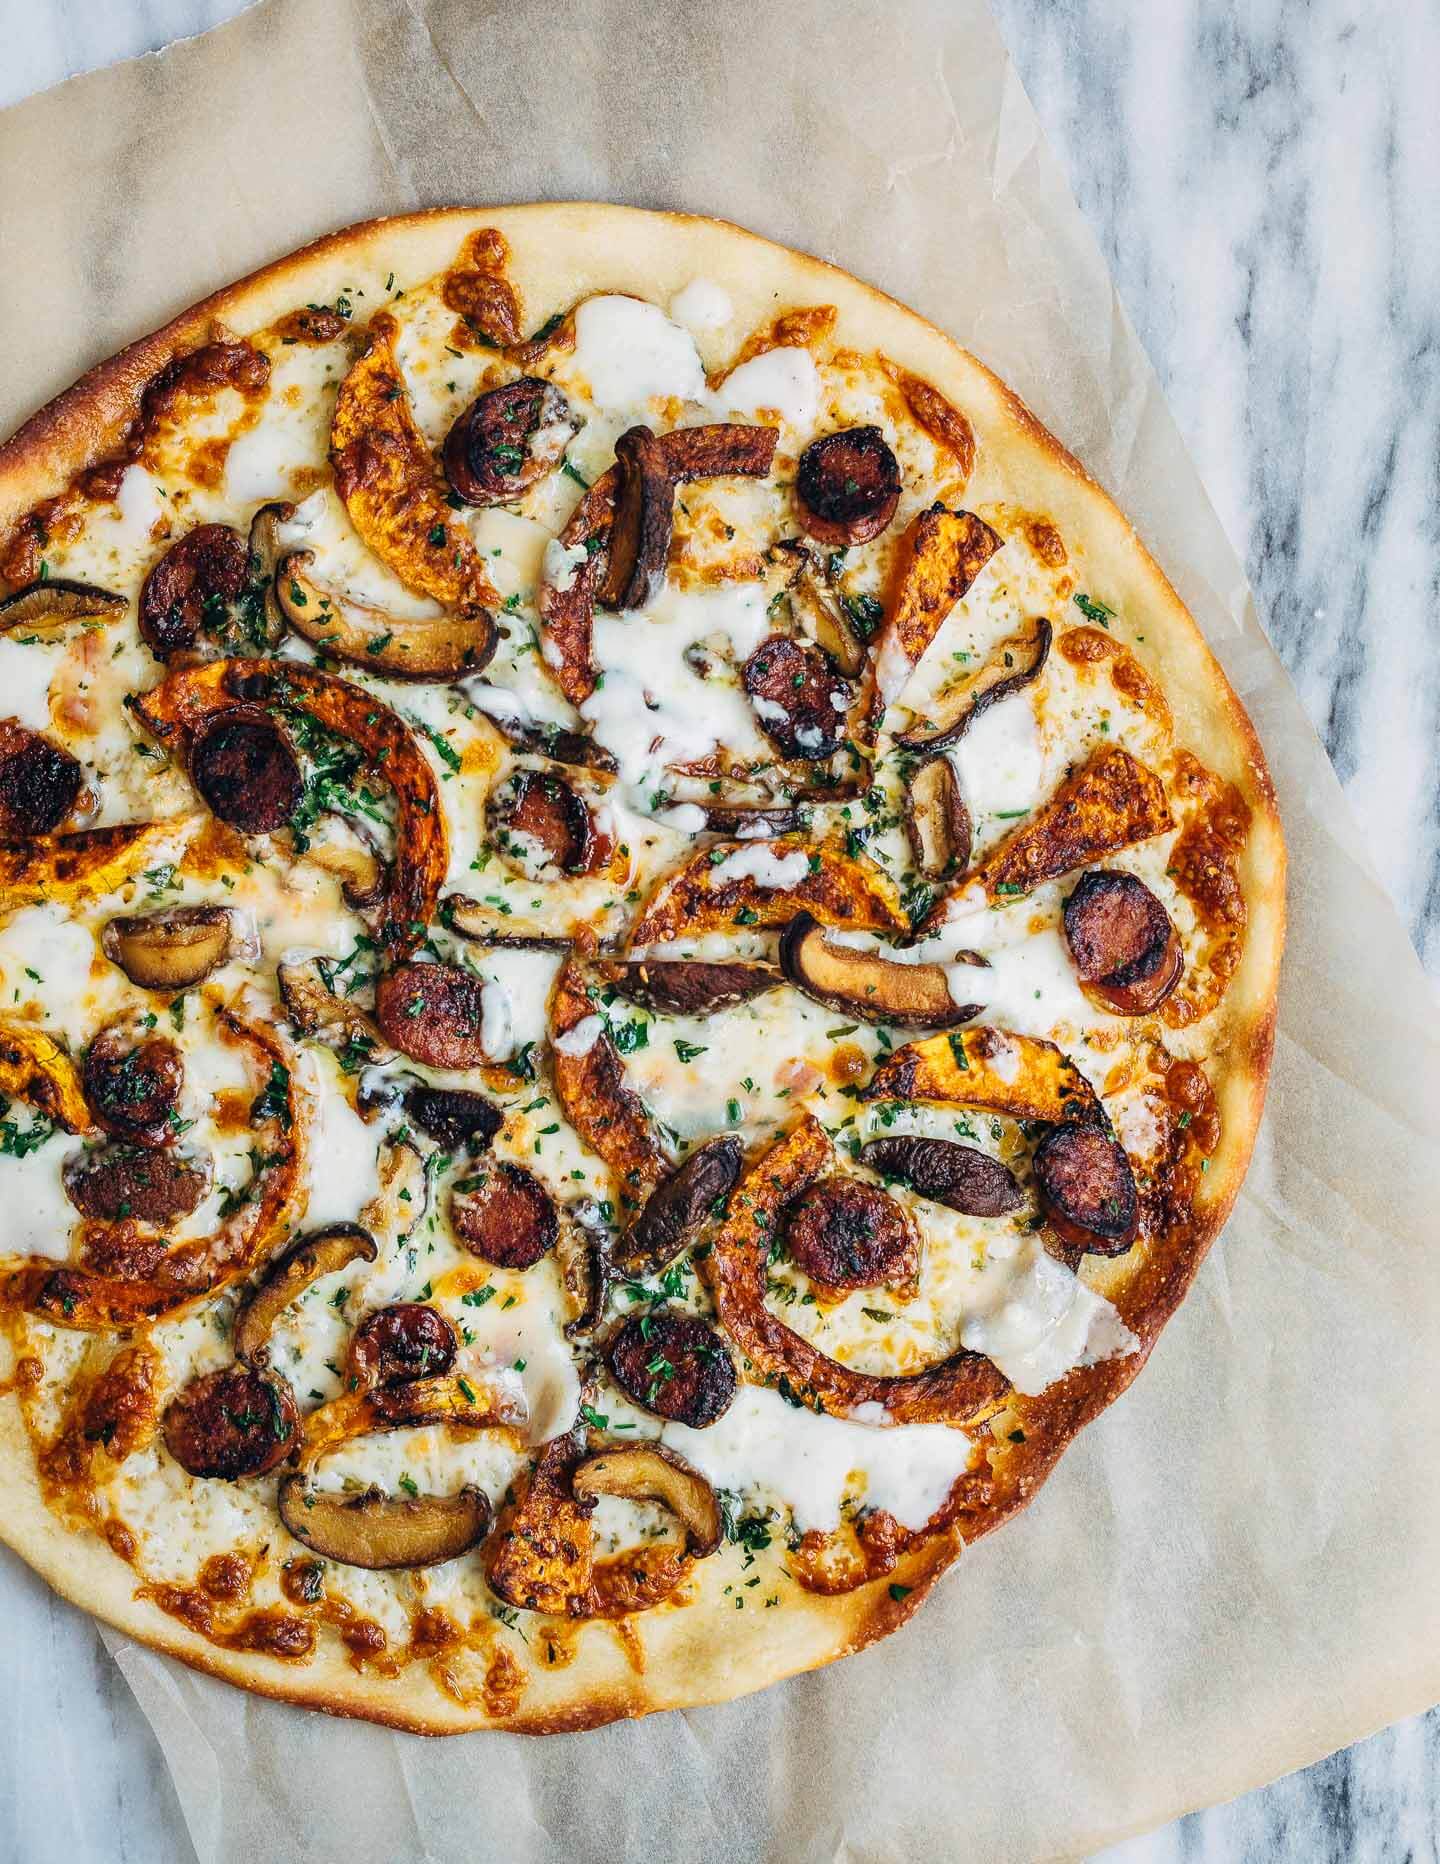 Roasted butternut squash and sausage pizza makes for the BEST fall meal!